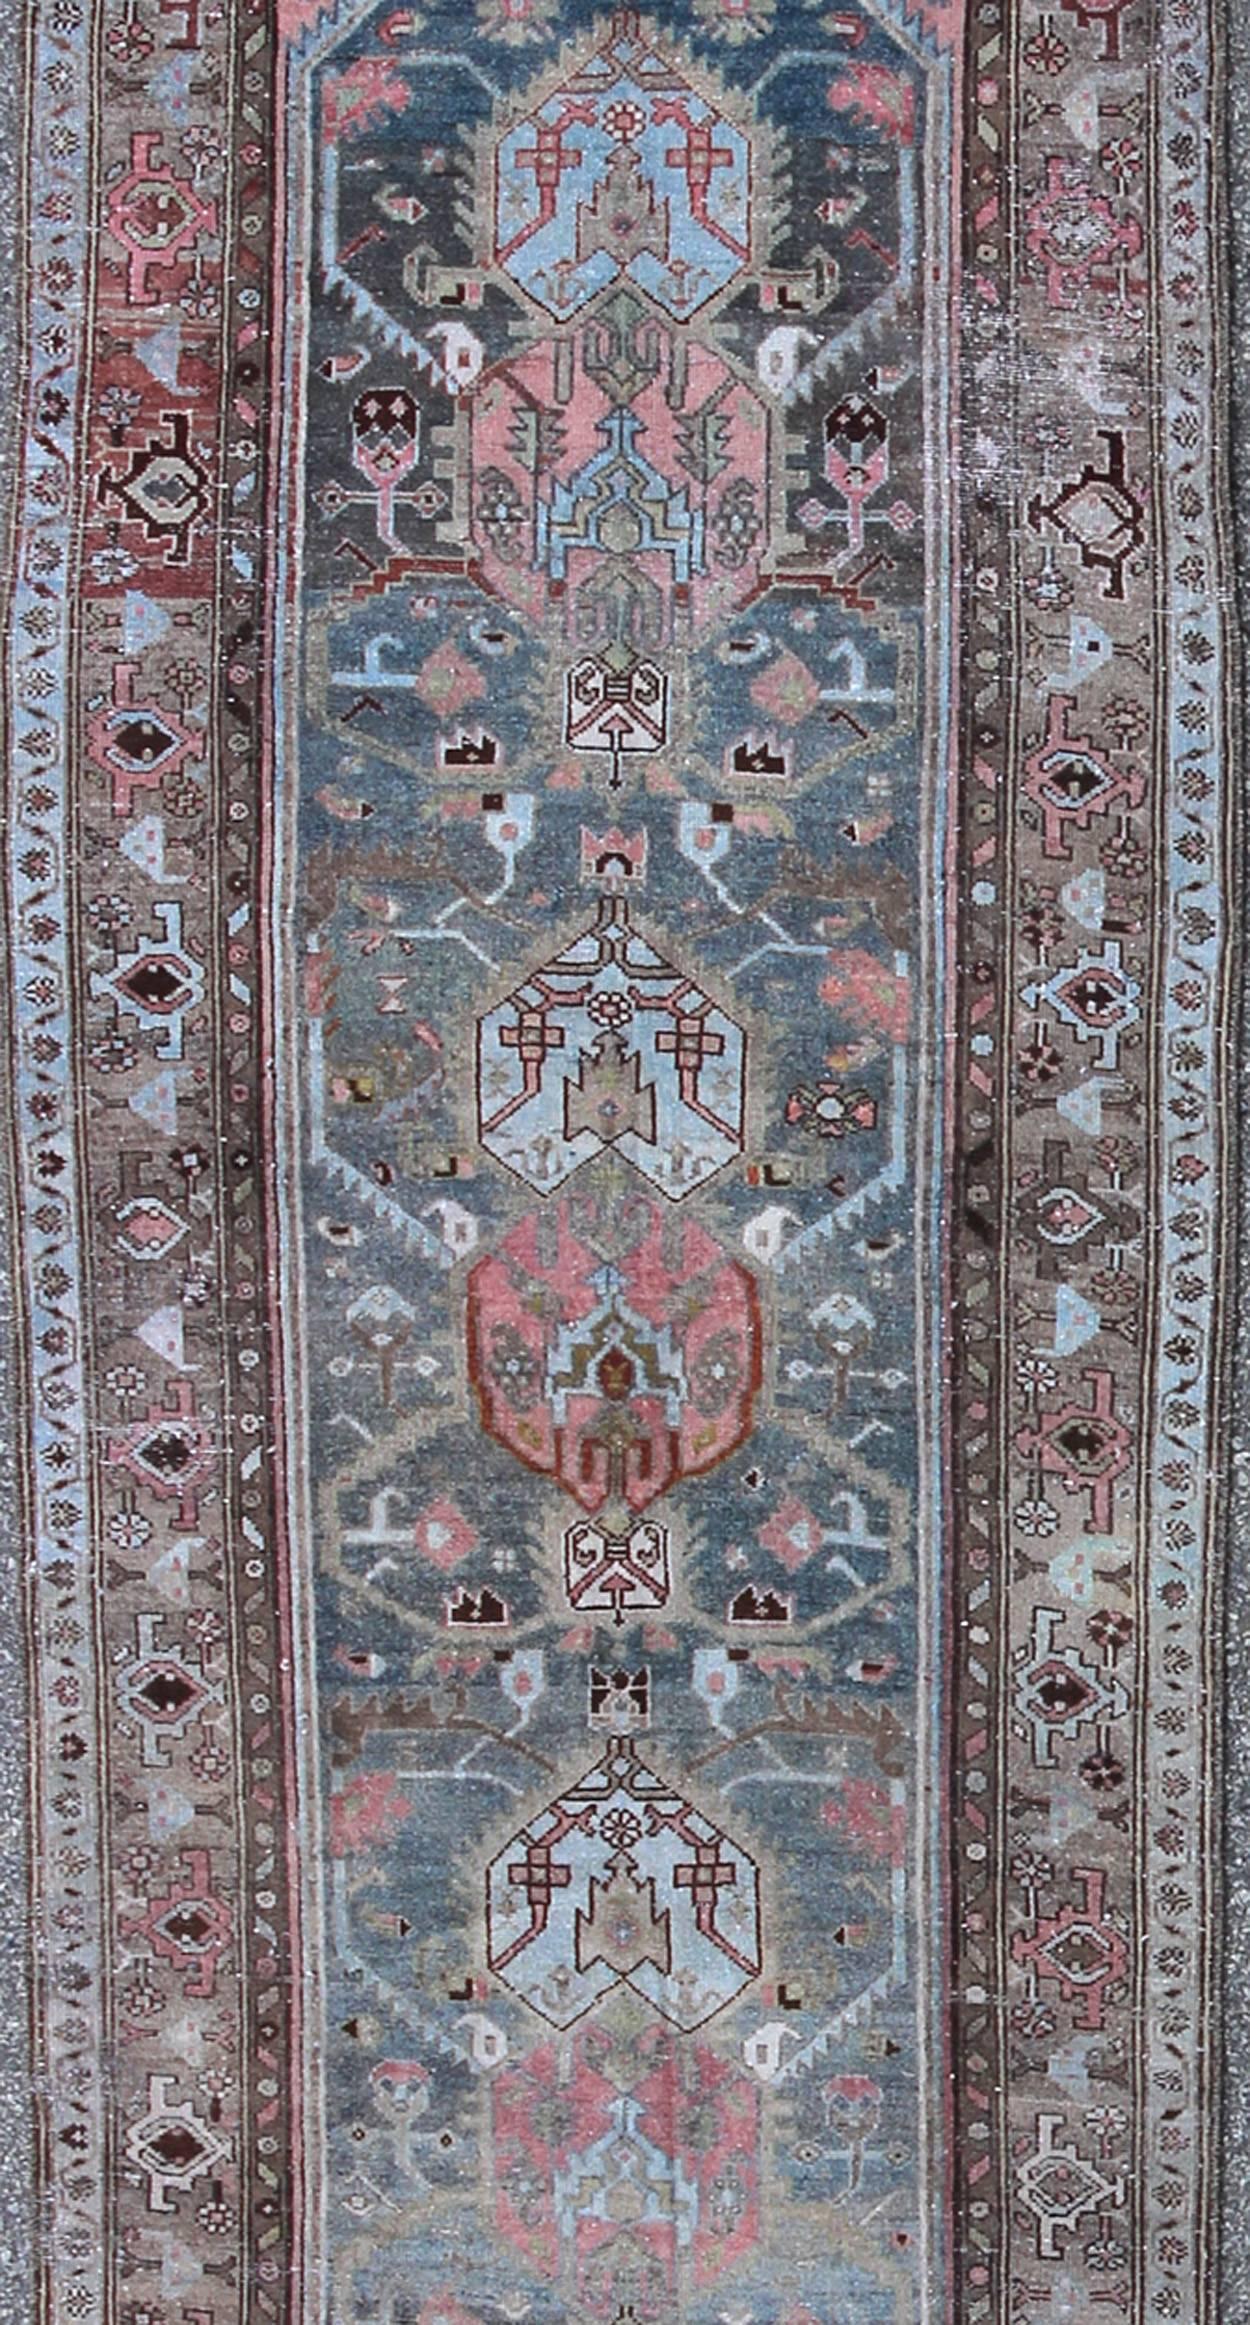 Hand-Knotted Persian Malayer Runner with Beautiful Color Palette of Blue, Pink, Red and Taupe